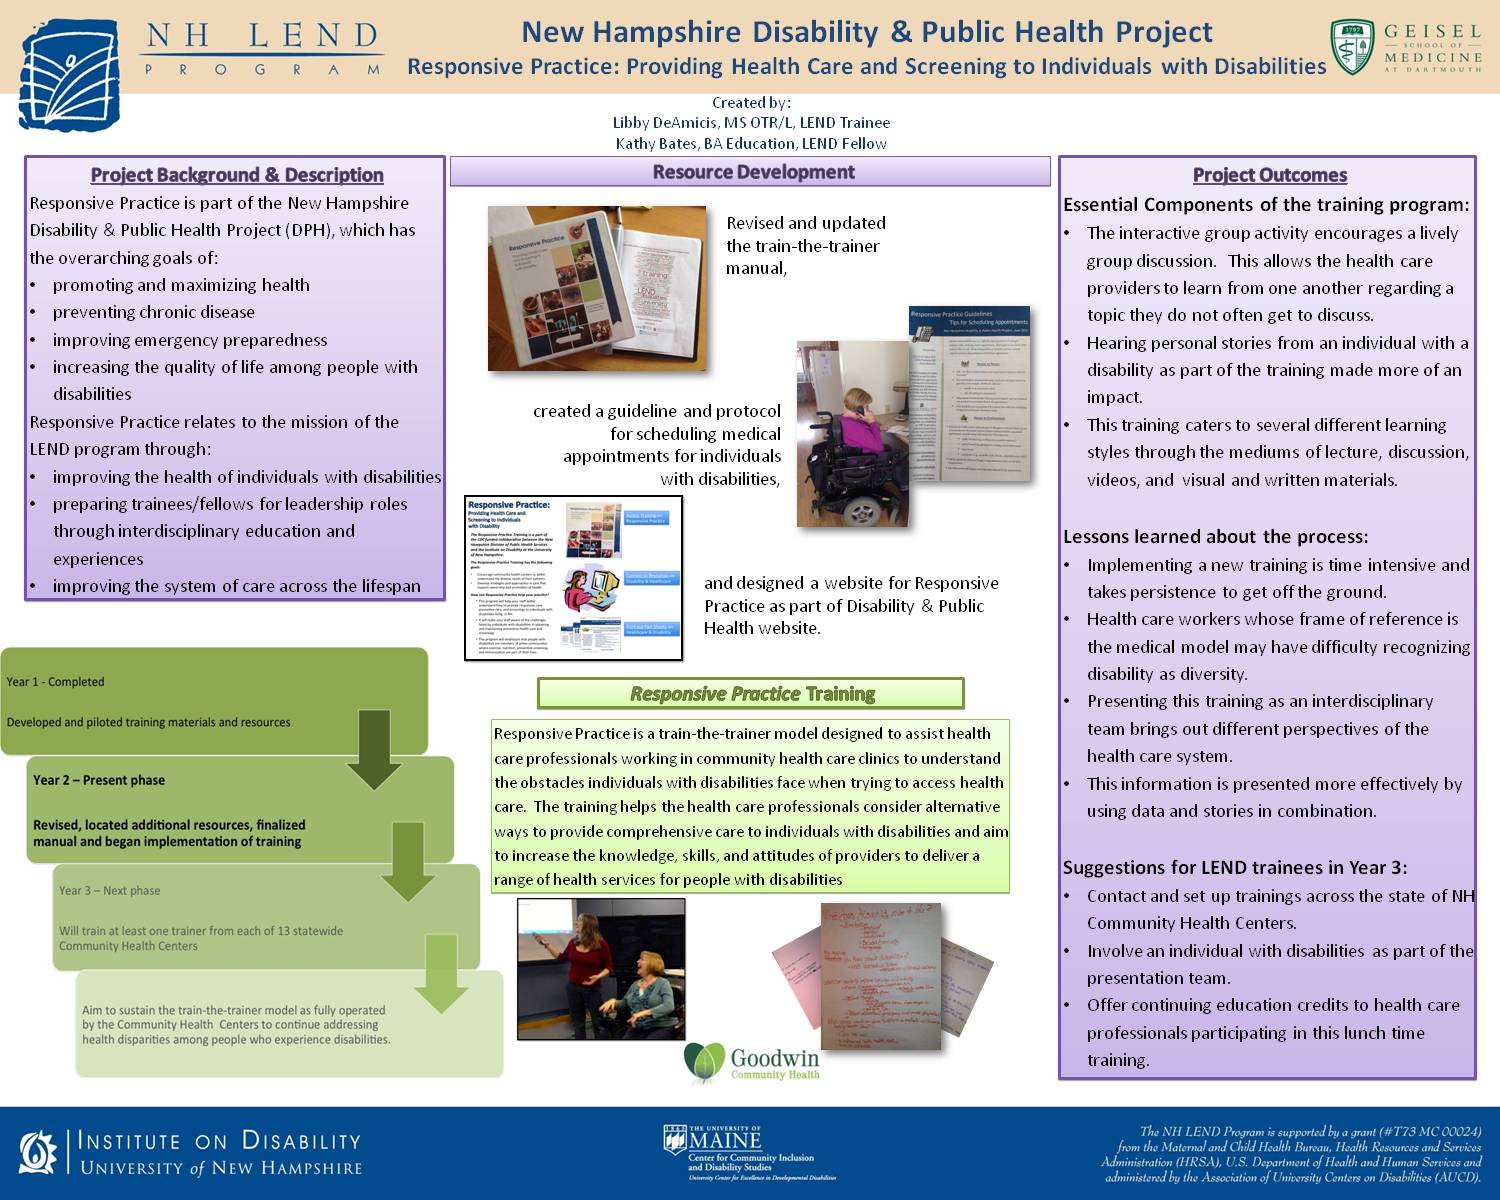 New Hampshire Disability & Public Health Project Responsive Practice: Health Care And Screenings To Individuals With Disabilities  by emp55